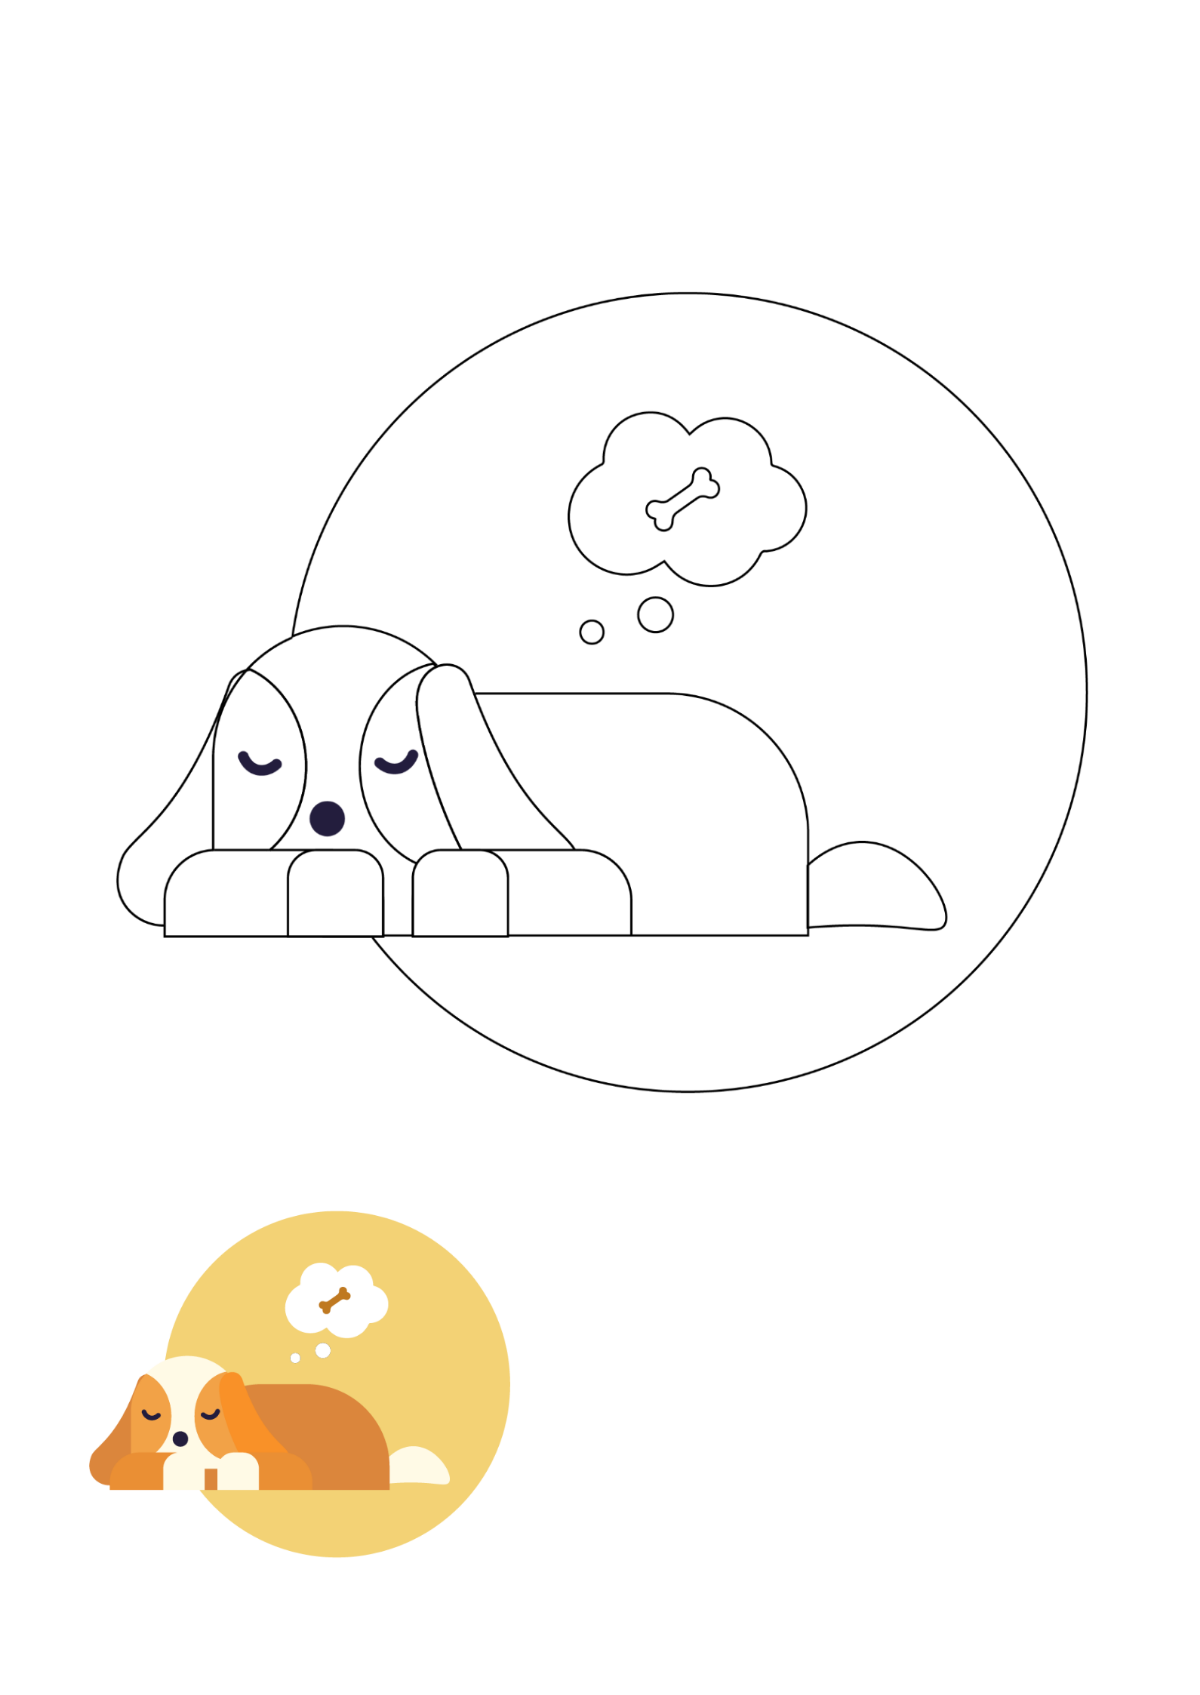 Cute Dog Coloring Page Template